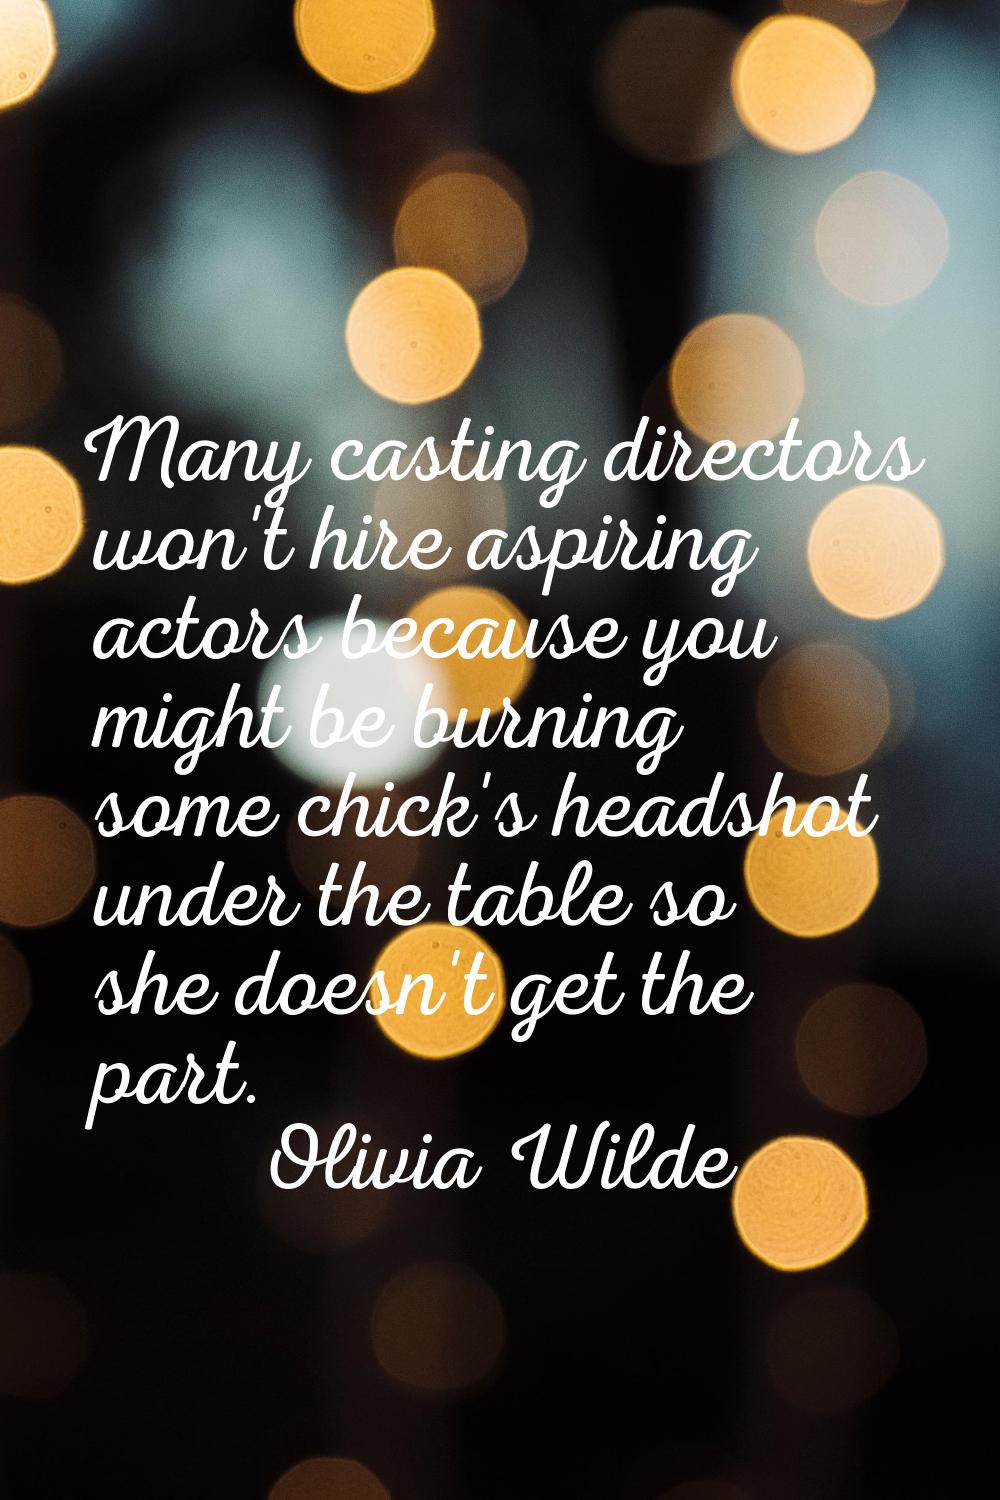 Many casting directors won't hire aspiring actors because you might be burning some chick's headsho